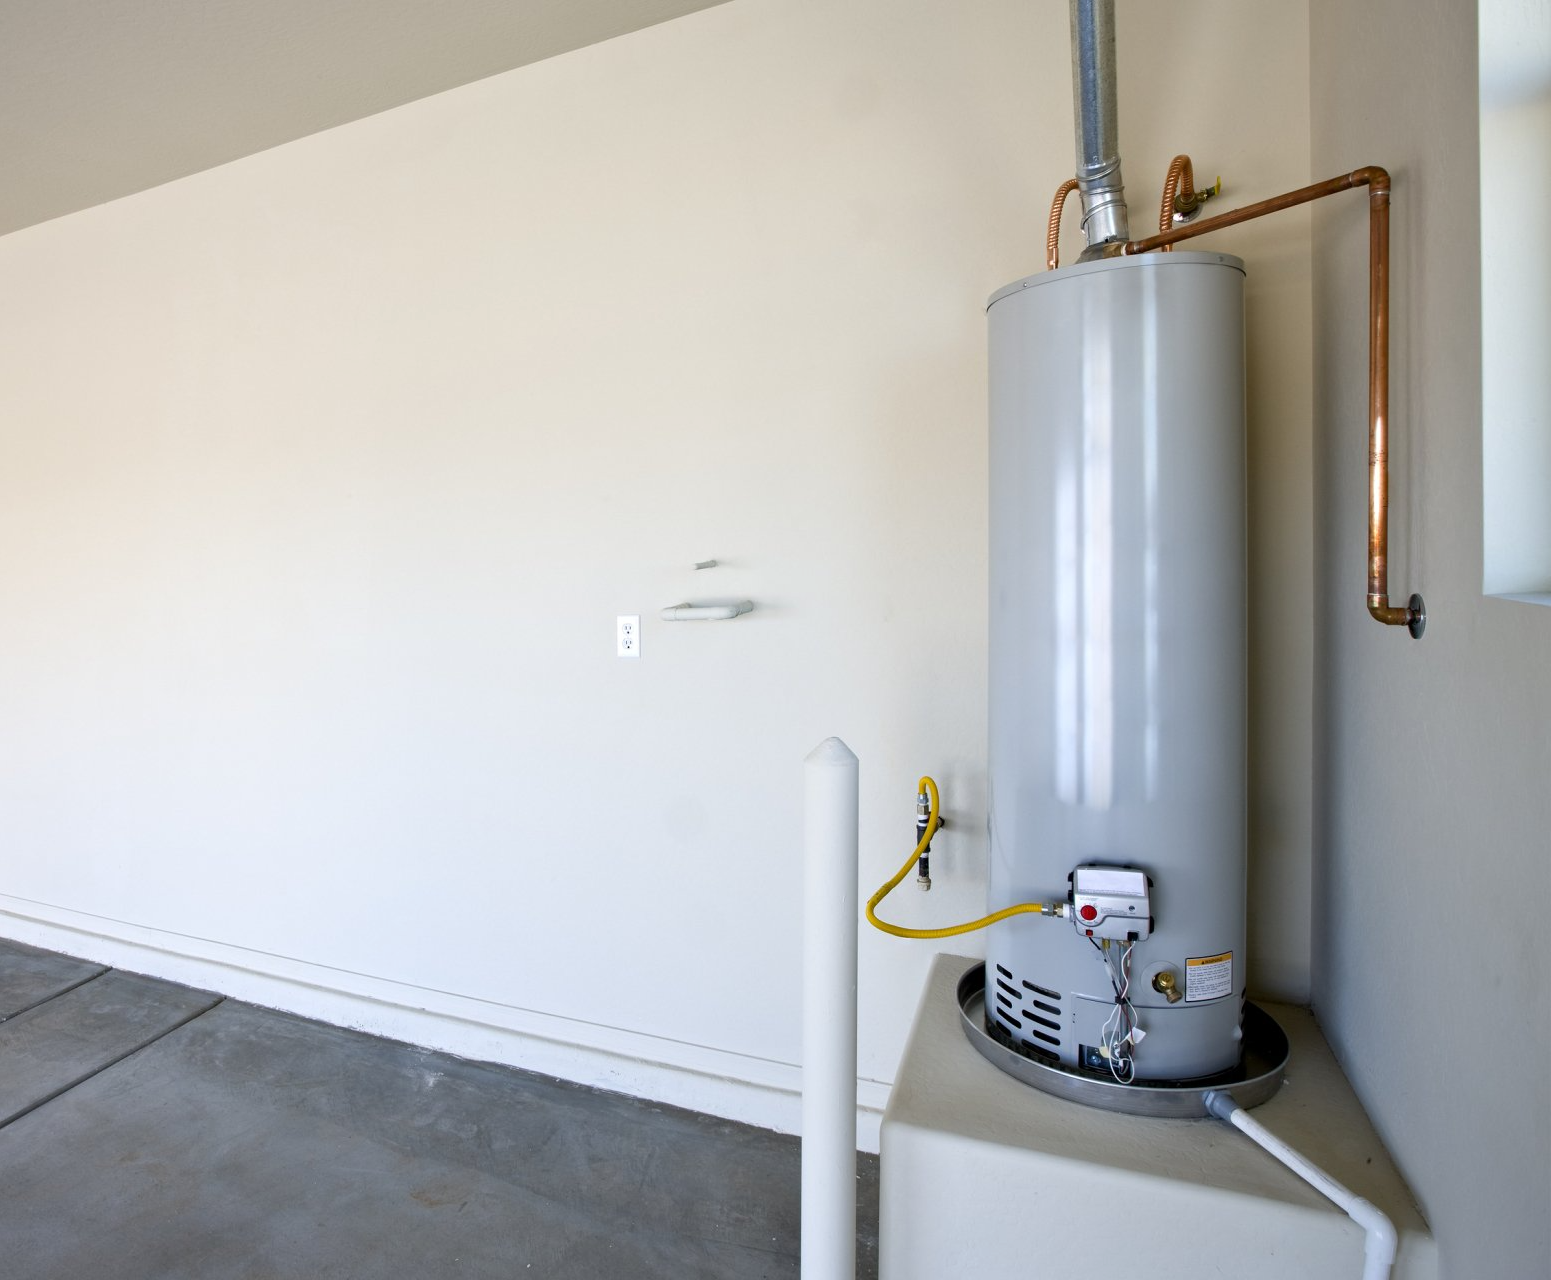 Water Heater Installation and Repair Services Near You